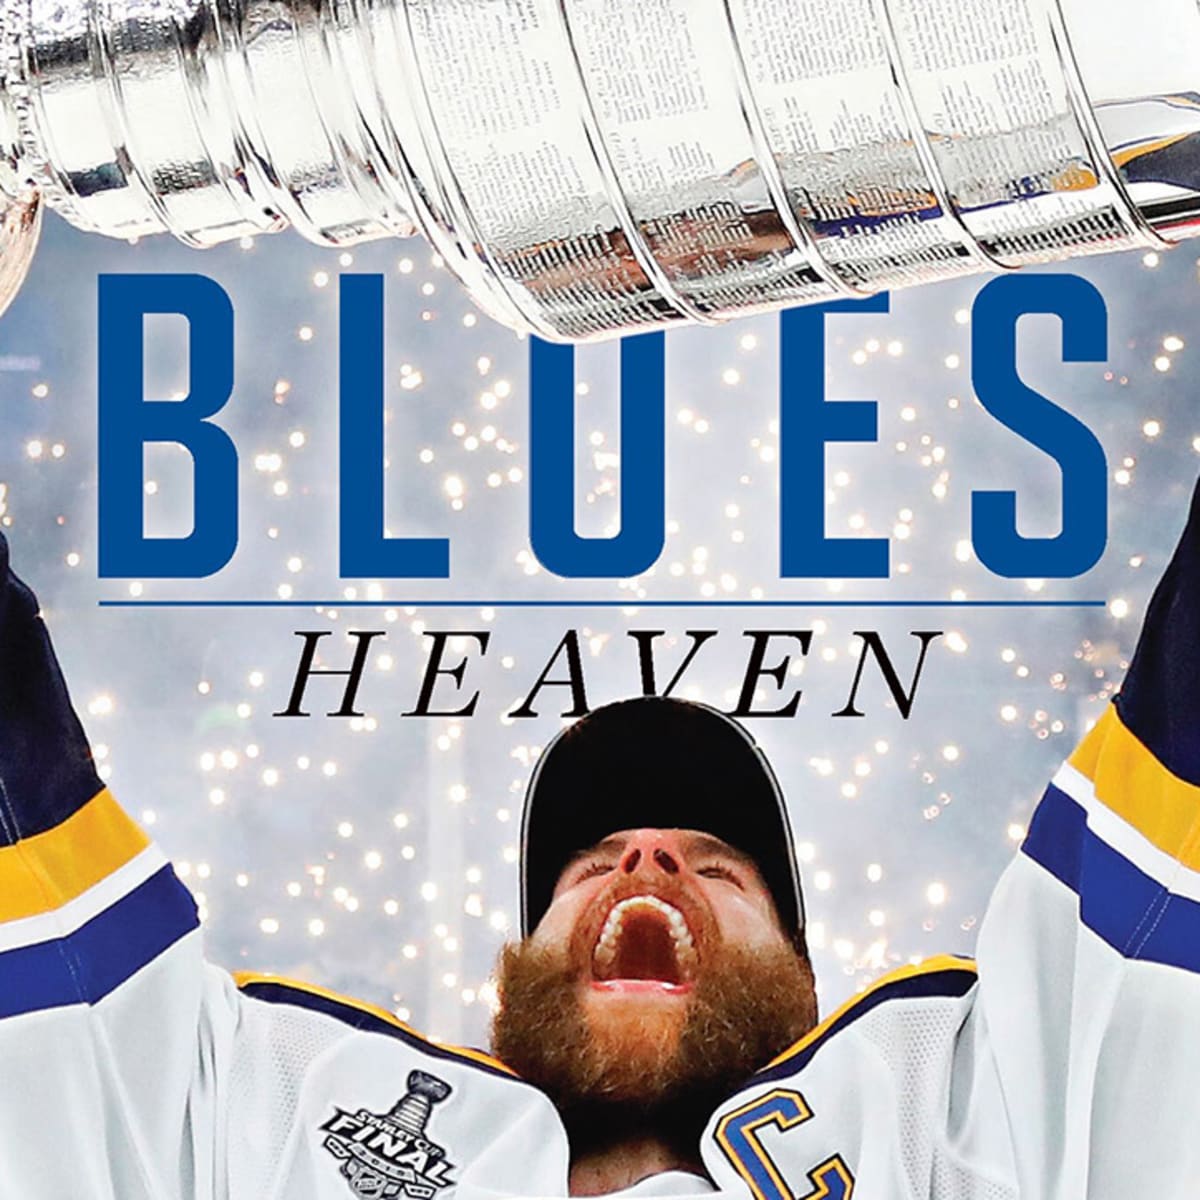 St. Louis Blues, 2019 Nhl Stanley Cup Champions Sports Illustrated